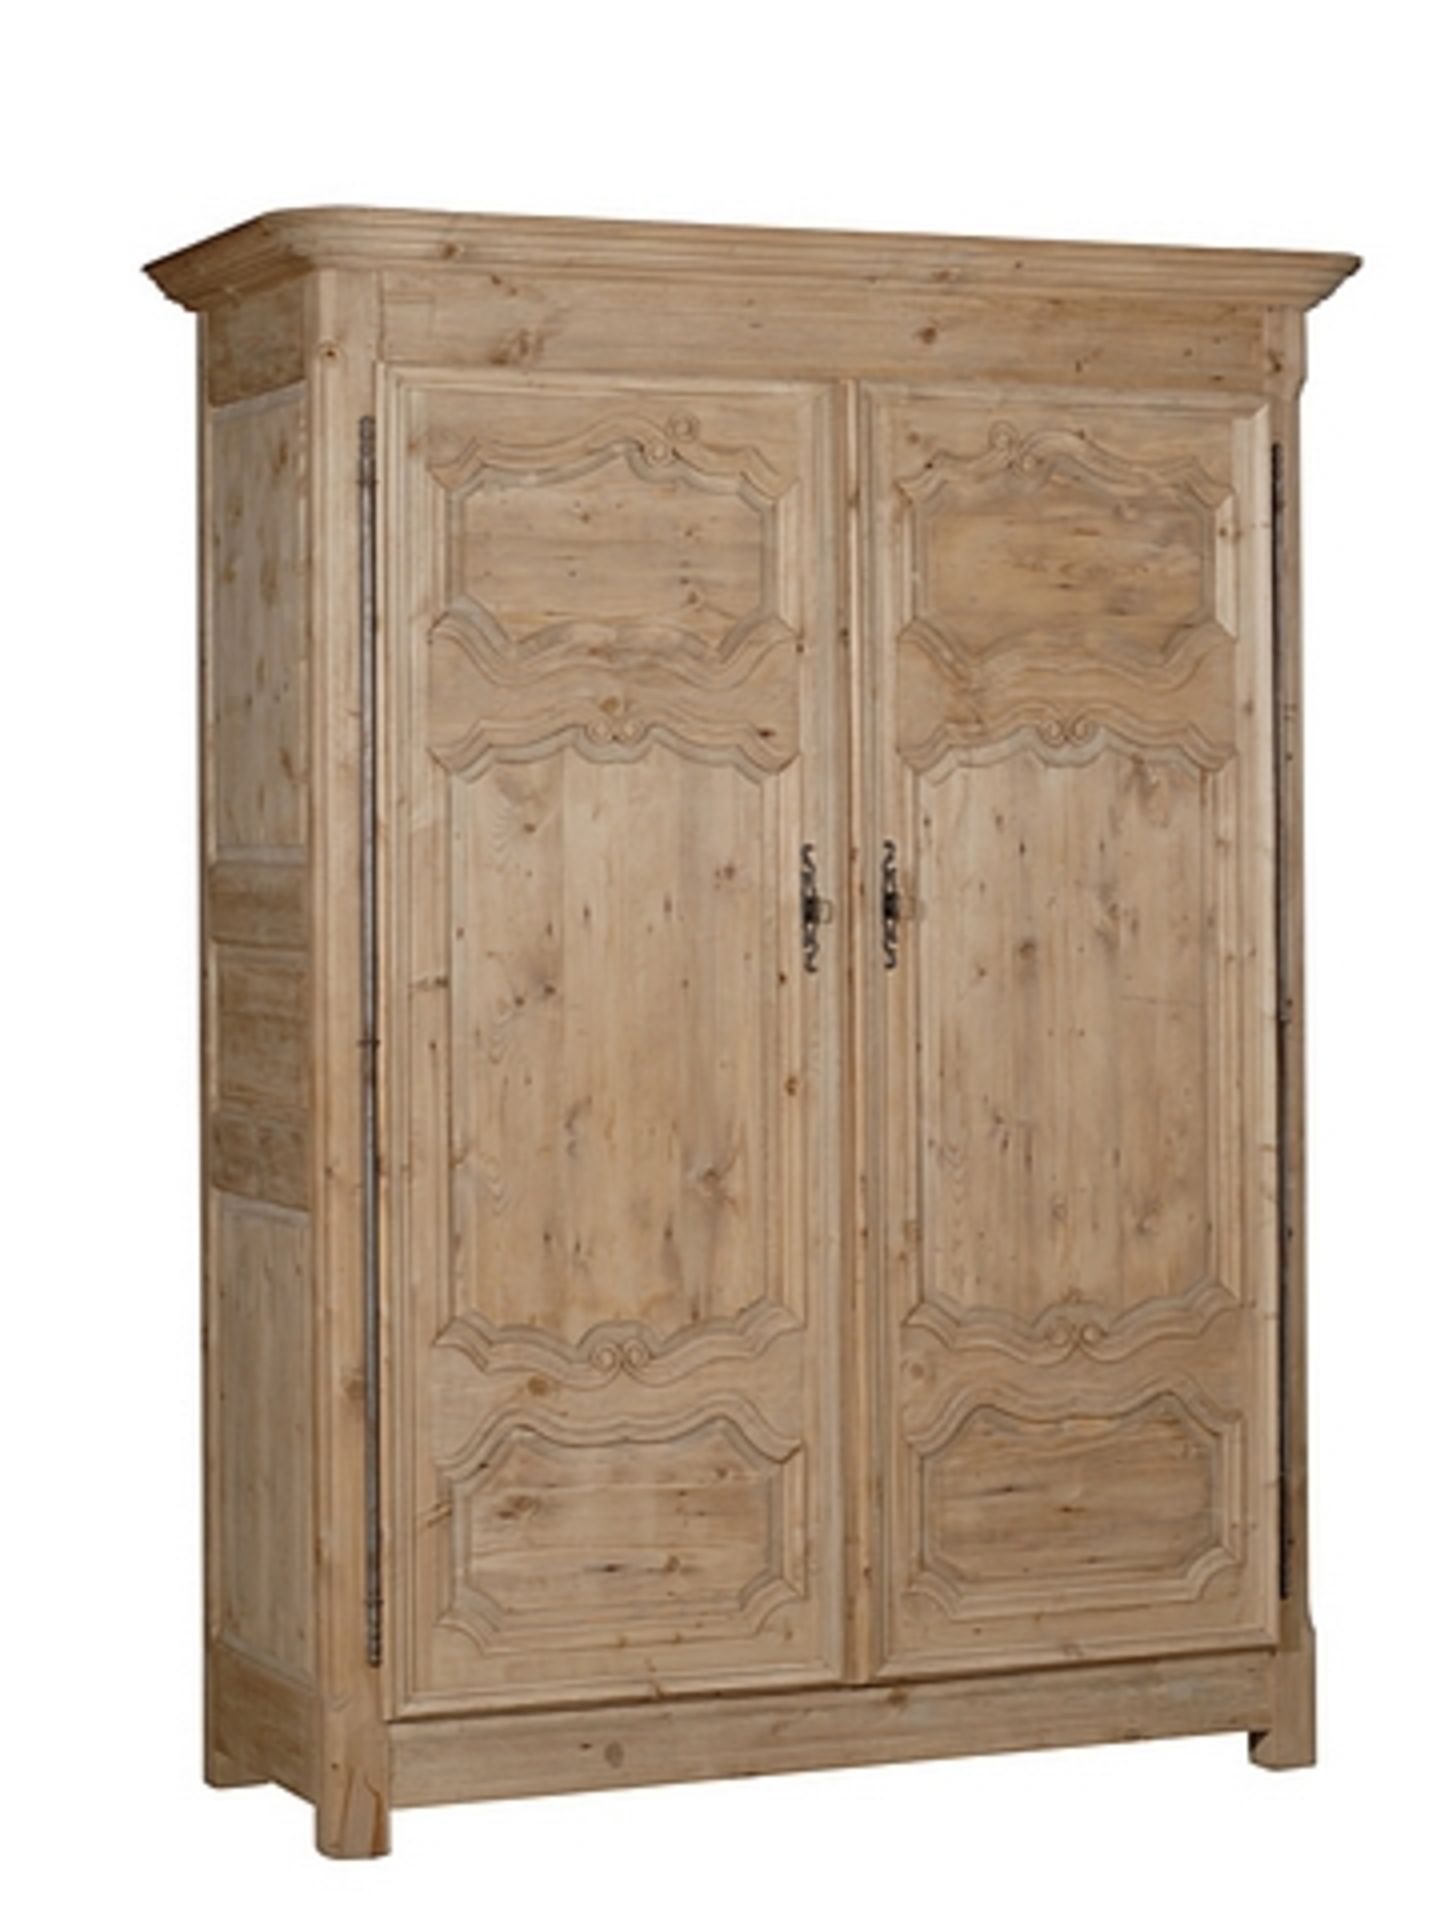 French Farmhouse Armoire Genuine English Reclaimed Timber 170 X 68 X 224cm - Image 2 of 2